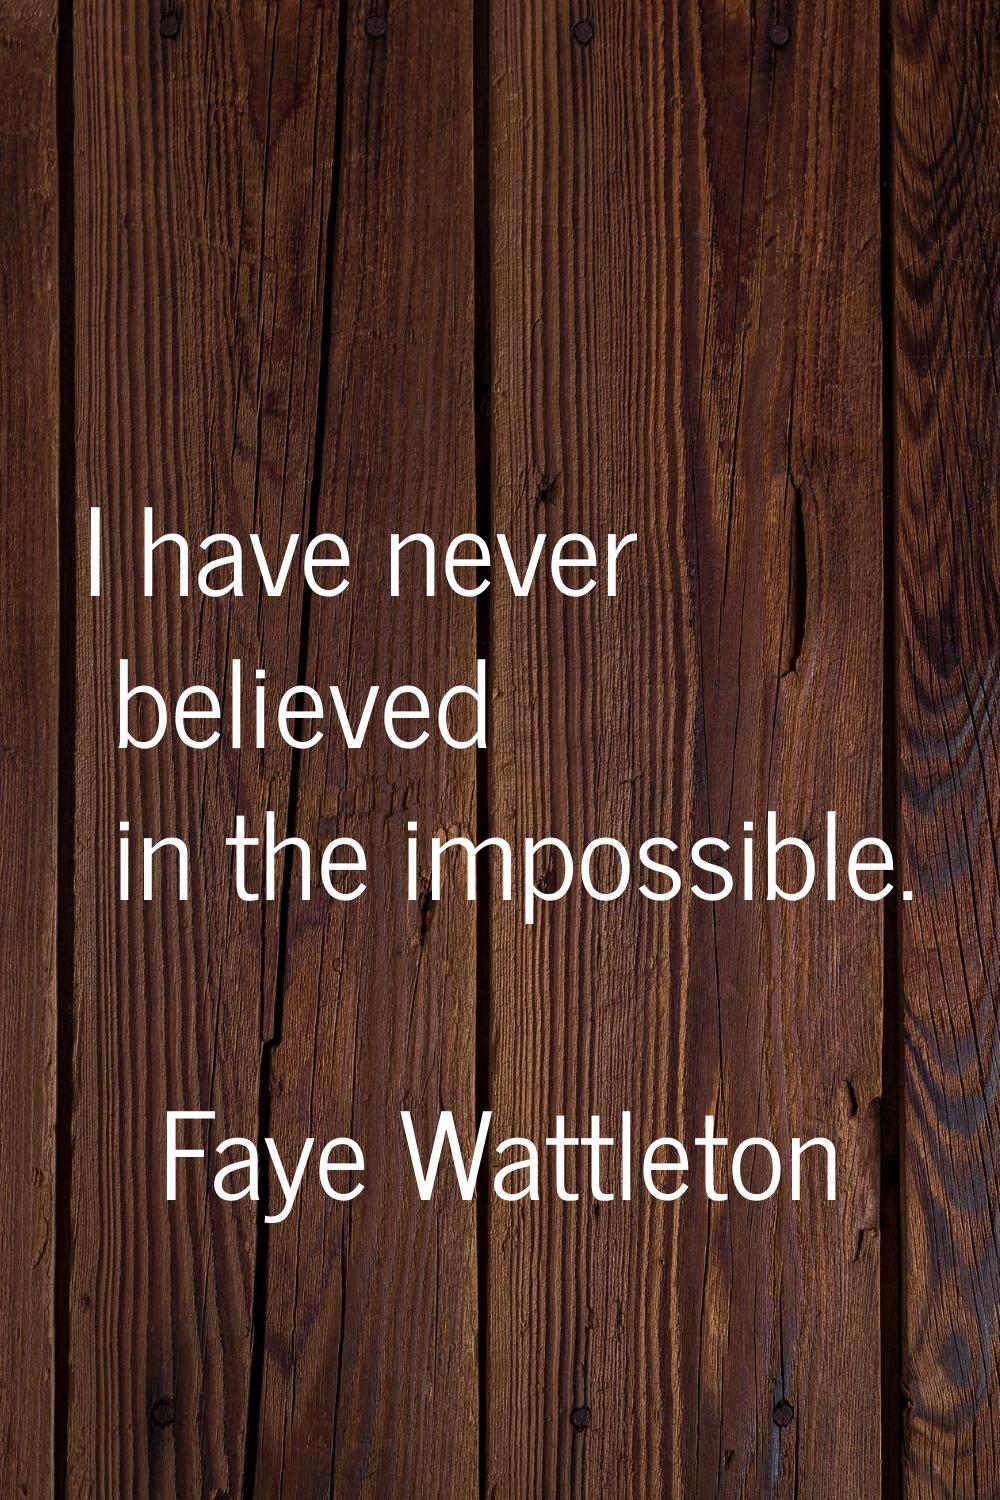 I have never believed in the impossible.